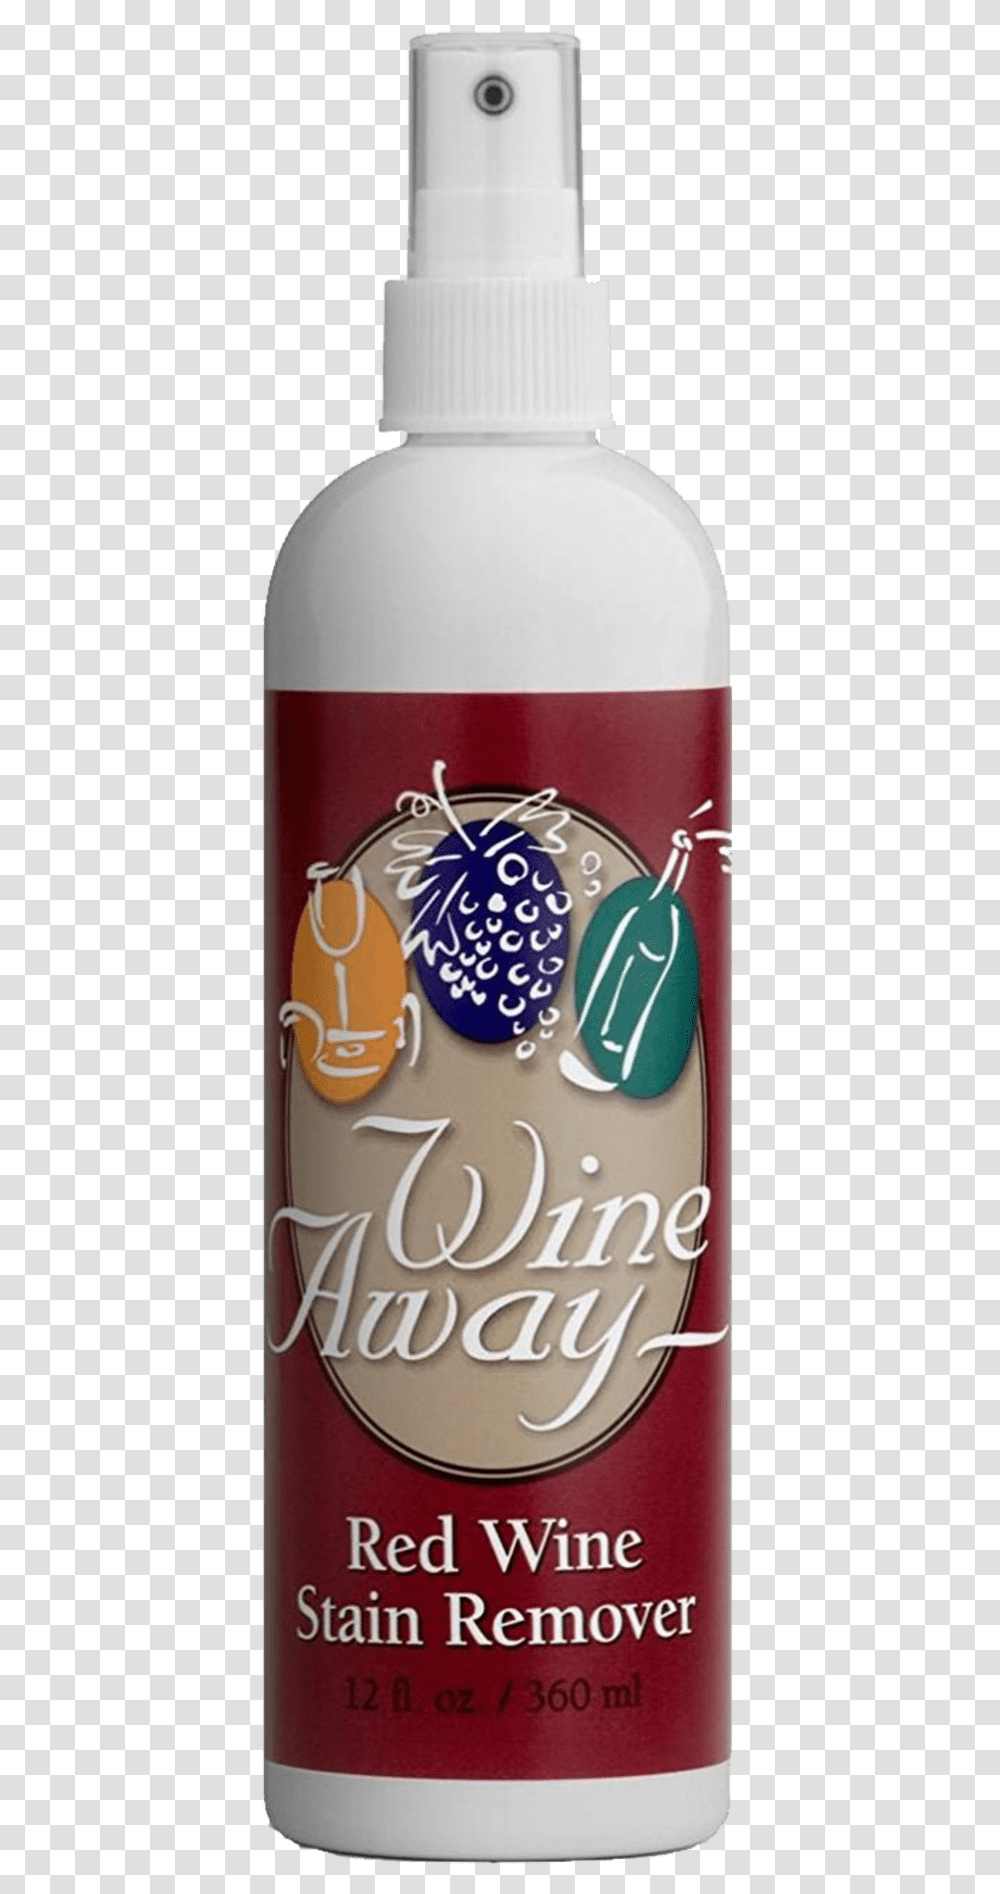 Wine Away Stain Remover, Food, Beer, Alcohol, Beverage Transparent Png